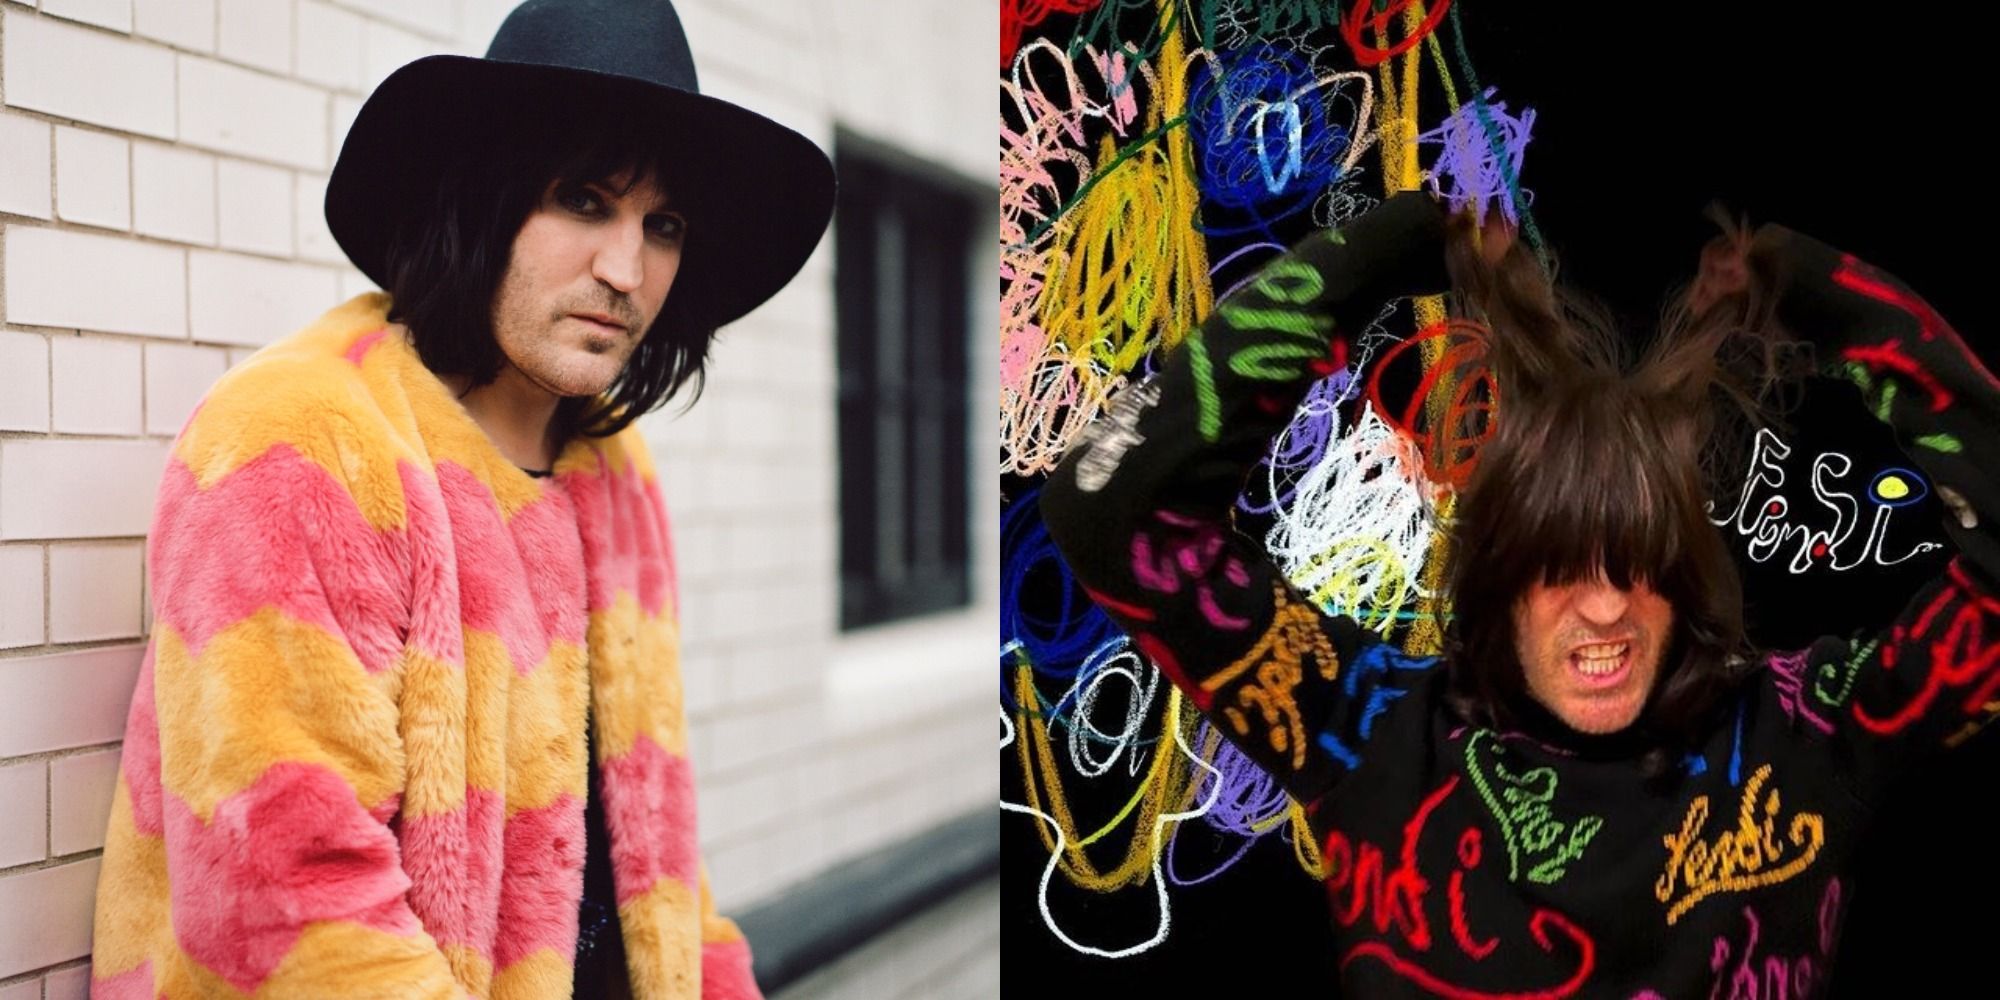 Split image showing Noel Fielding posing alone and with his artwork